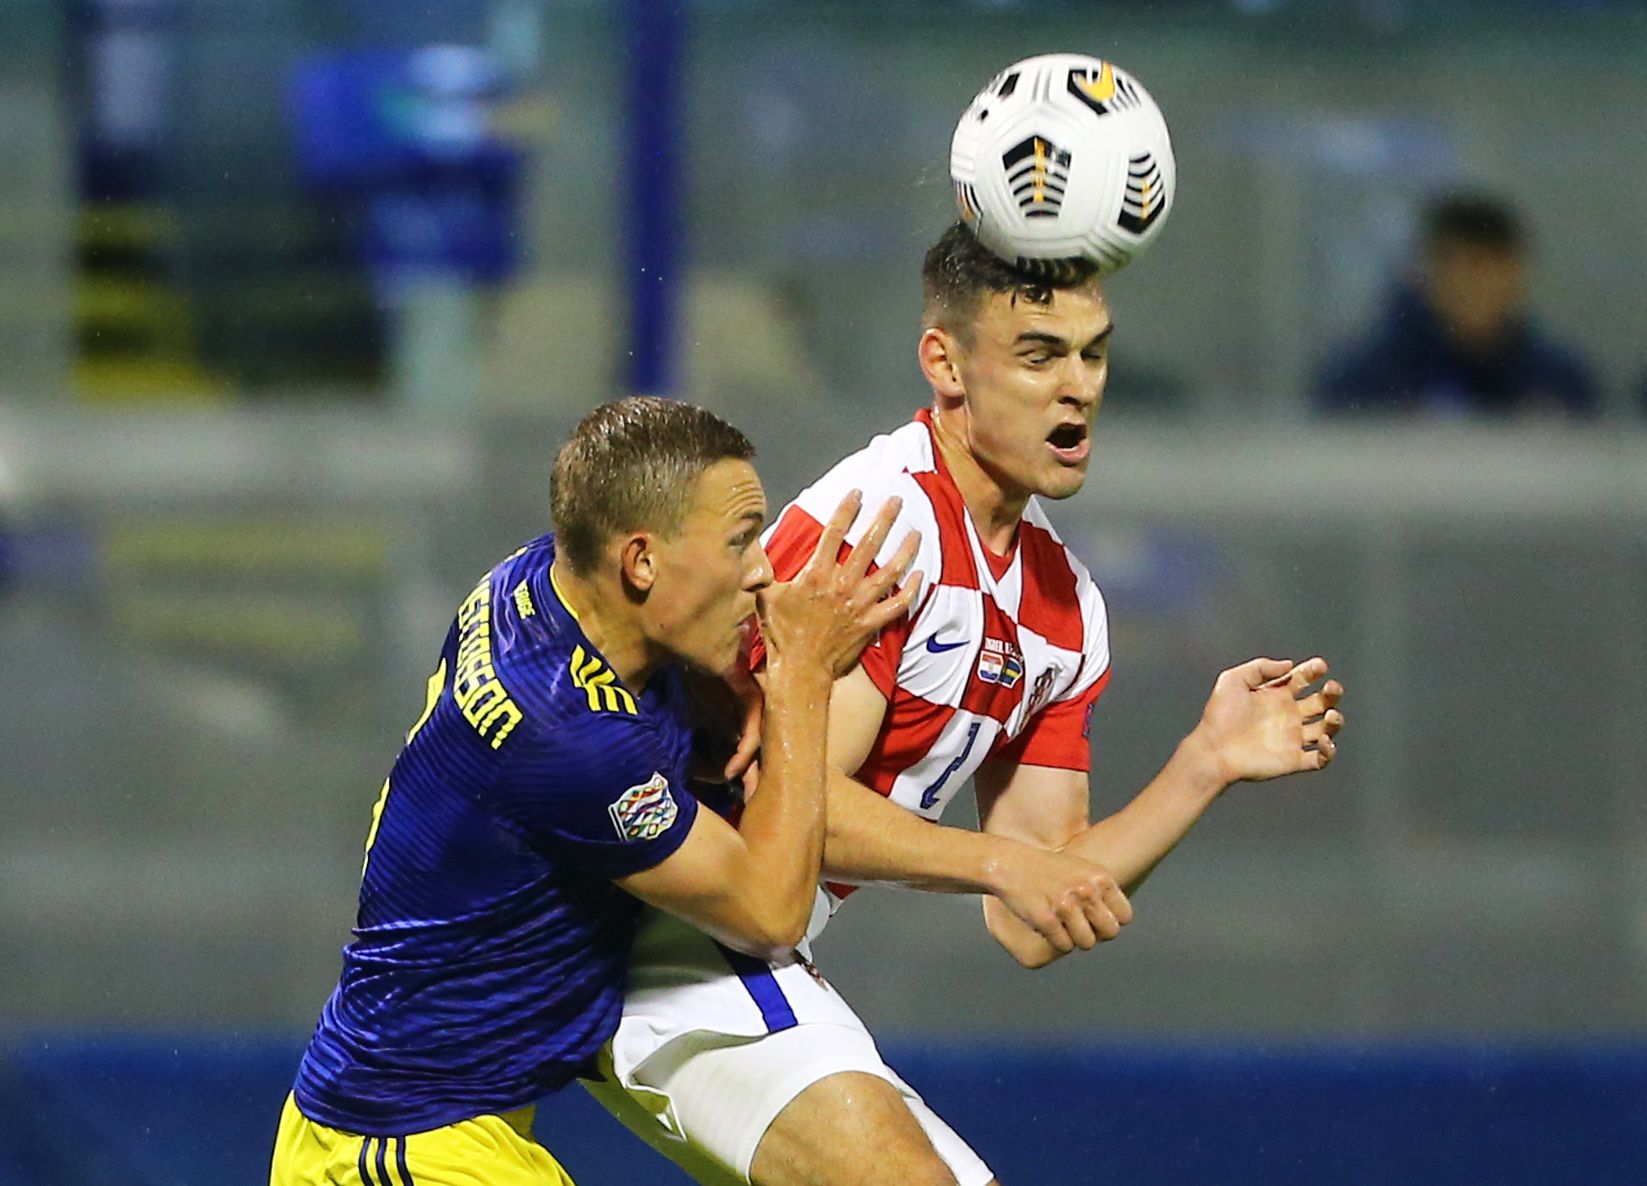 Soccer Football - UEFA Nations League - League A - Group 3 - Croatia v Sweden - Stadion Maksimir, Zagreb, Croatia - October 11, 2020. Croatia's Filip Uremovic in action with Sweden's Ludwig Augustinsson REUTERS/Antonio Bronic